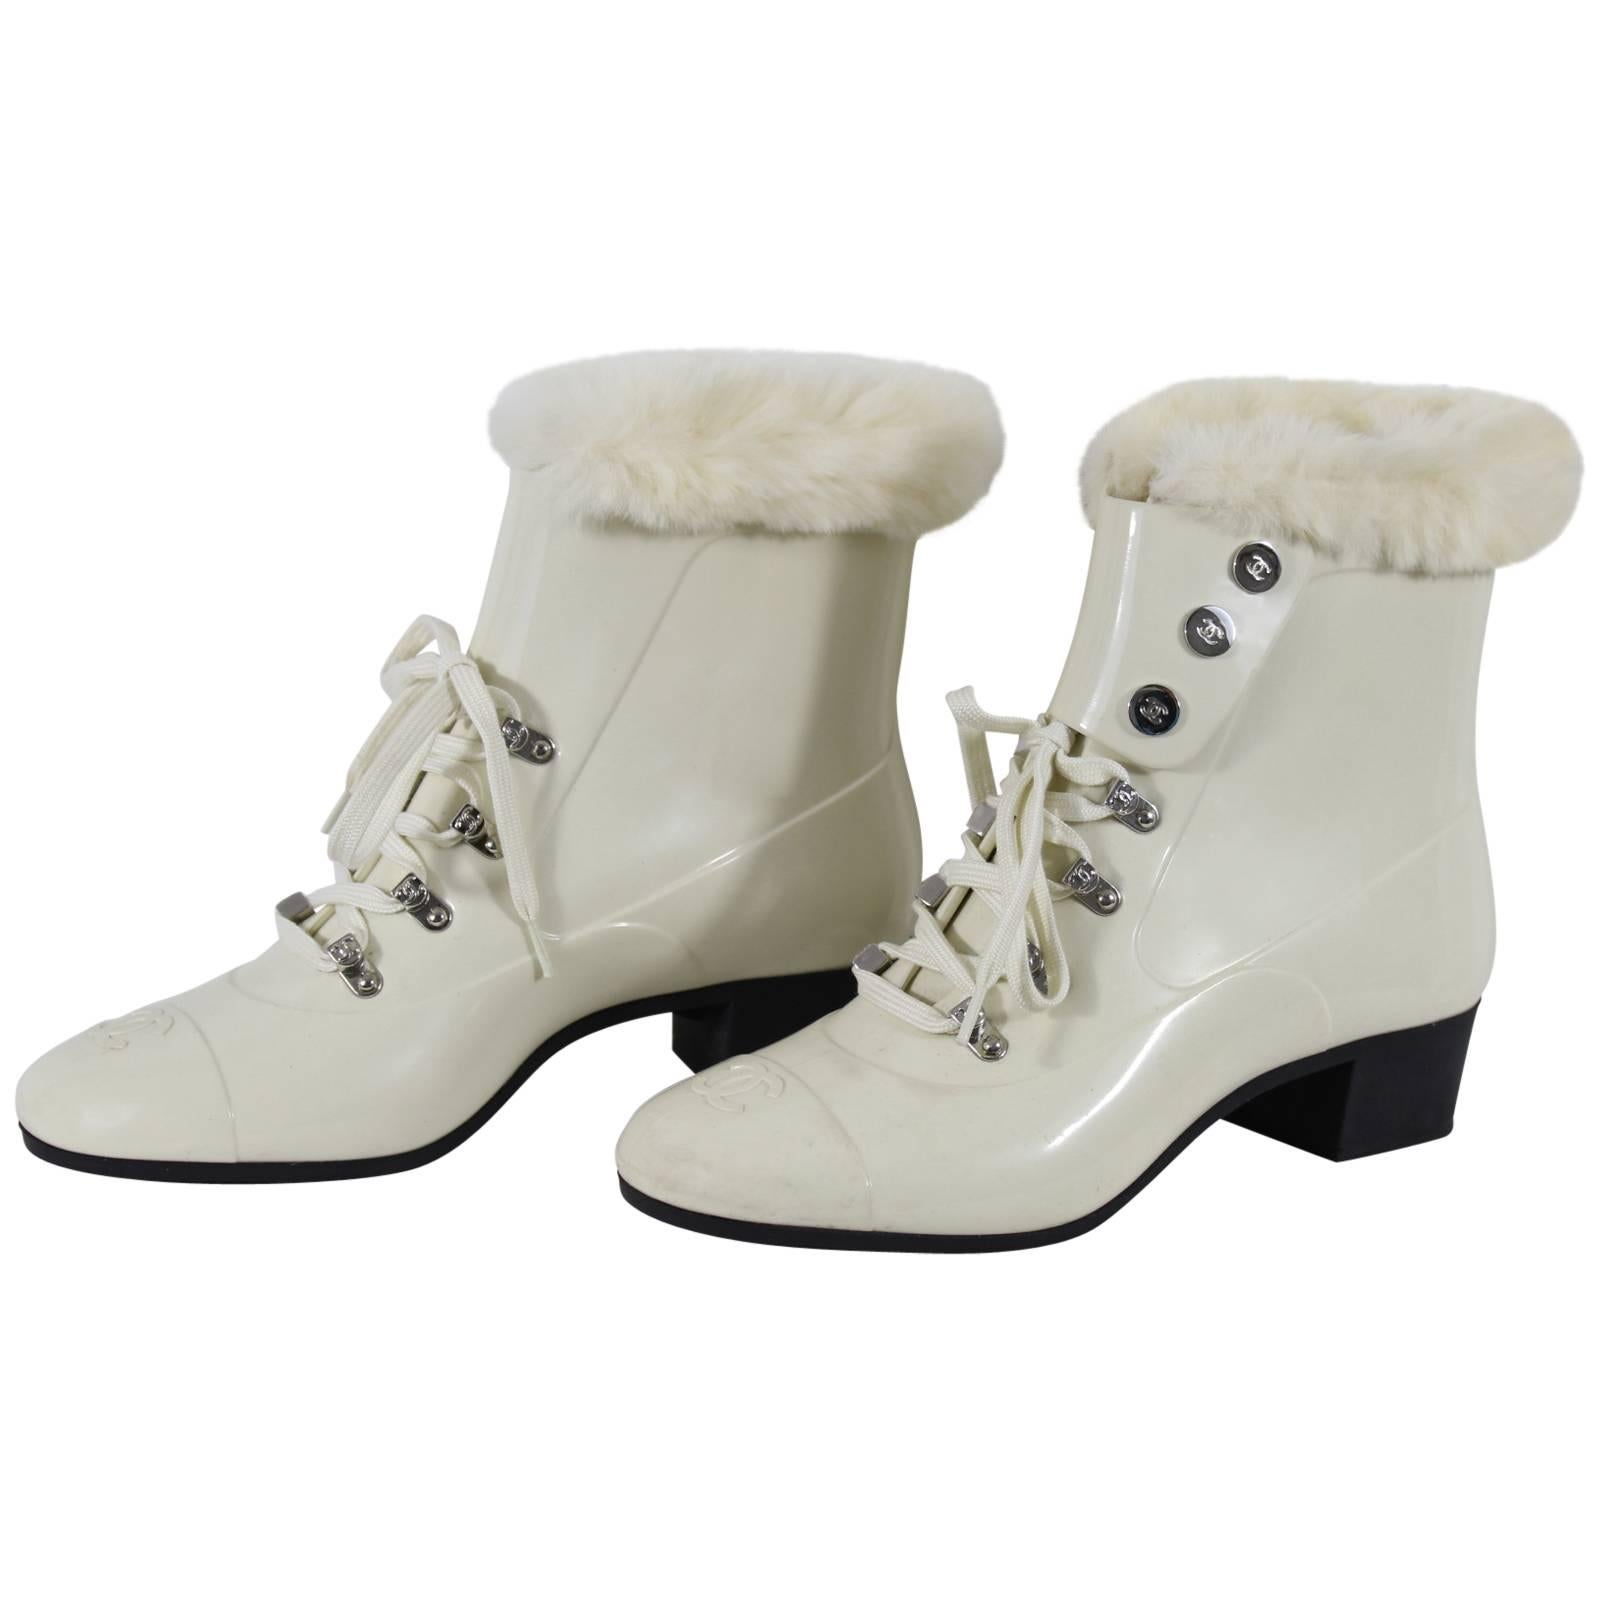 White Chanel Boots with Fur Inside Size 36